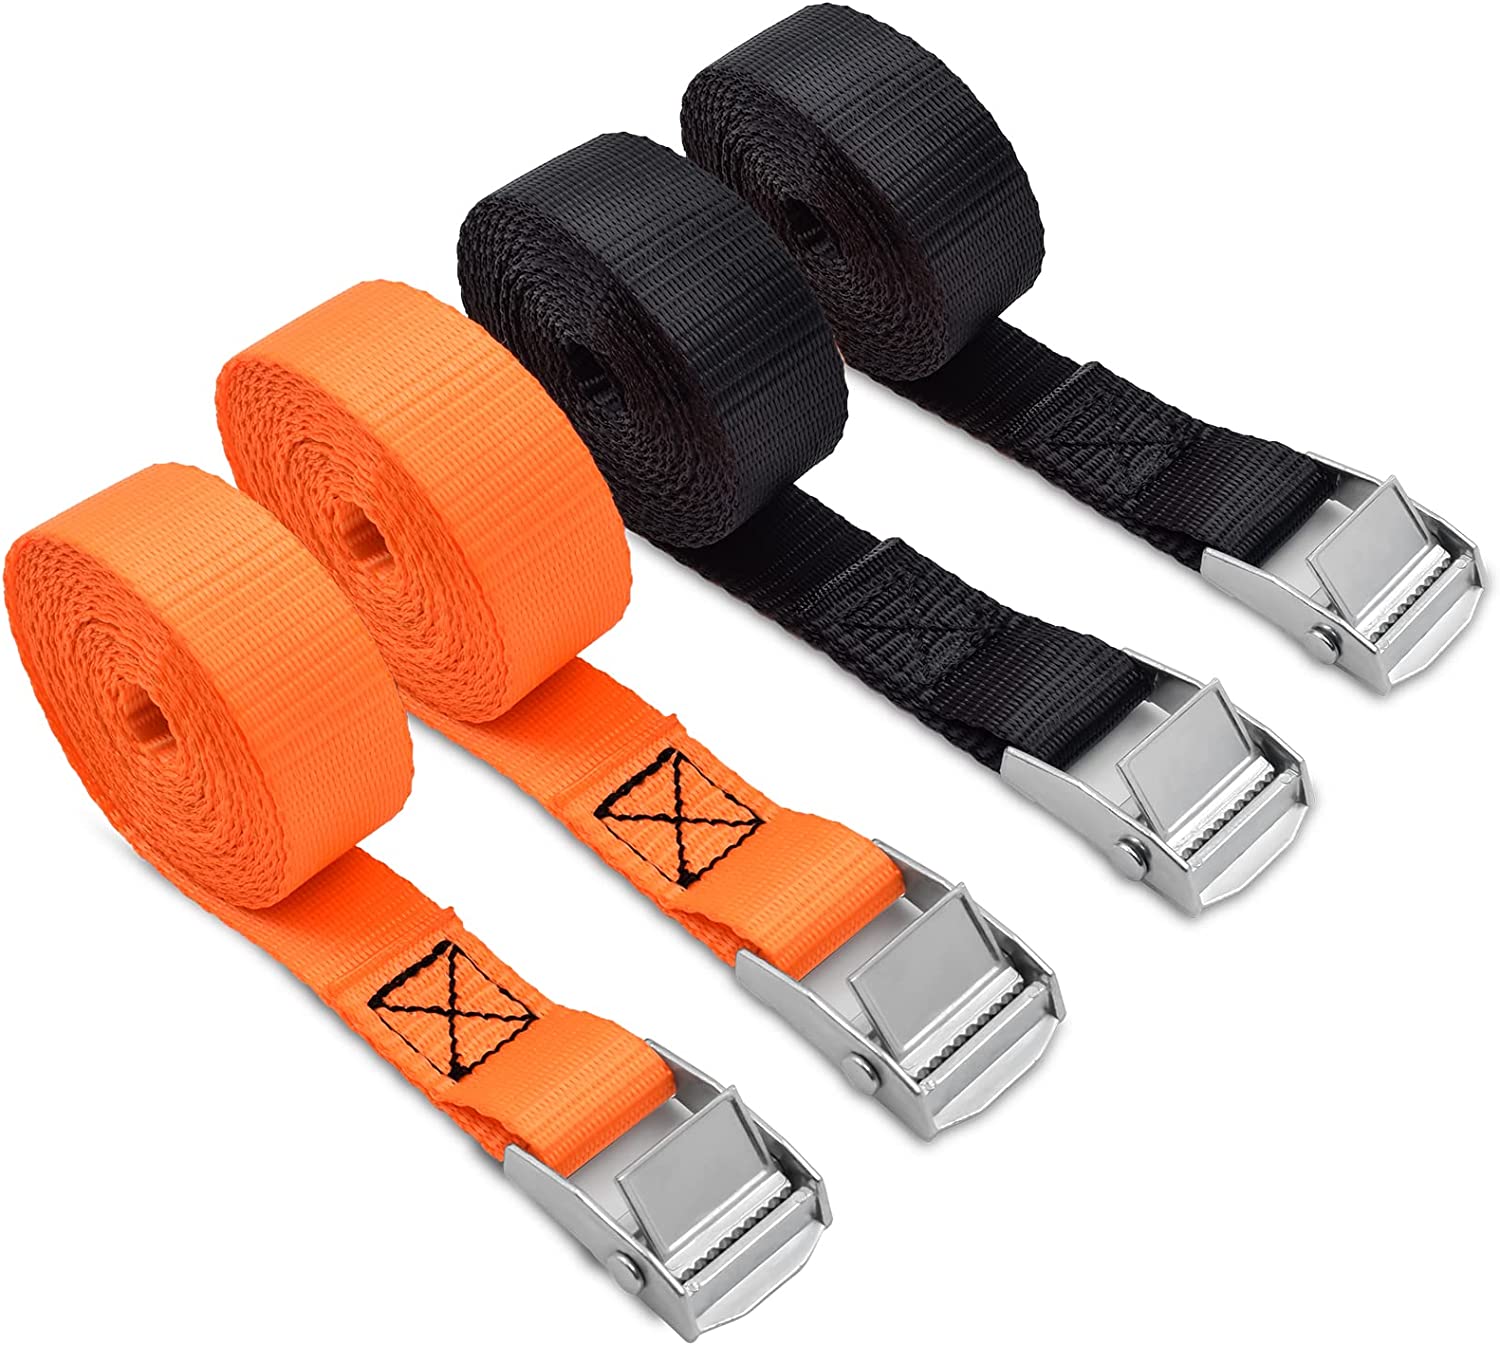 Acelane Lashing Straps 10′ x 1” Cam Buckle Tie Down Straps Heavy Duty Up to 800lbs for Cargo, Luggage, Bicycles, Motorcycles, Kayaks, Surfboards, Fur